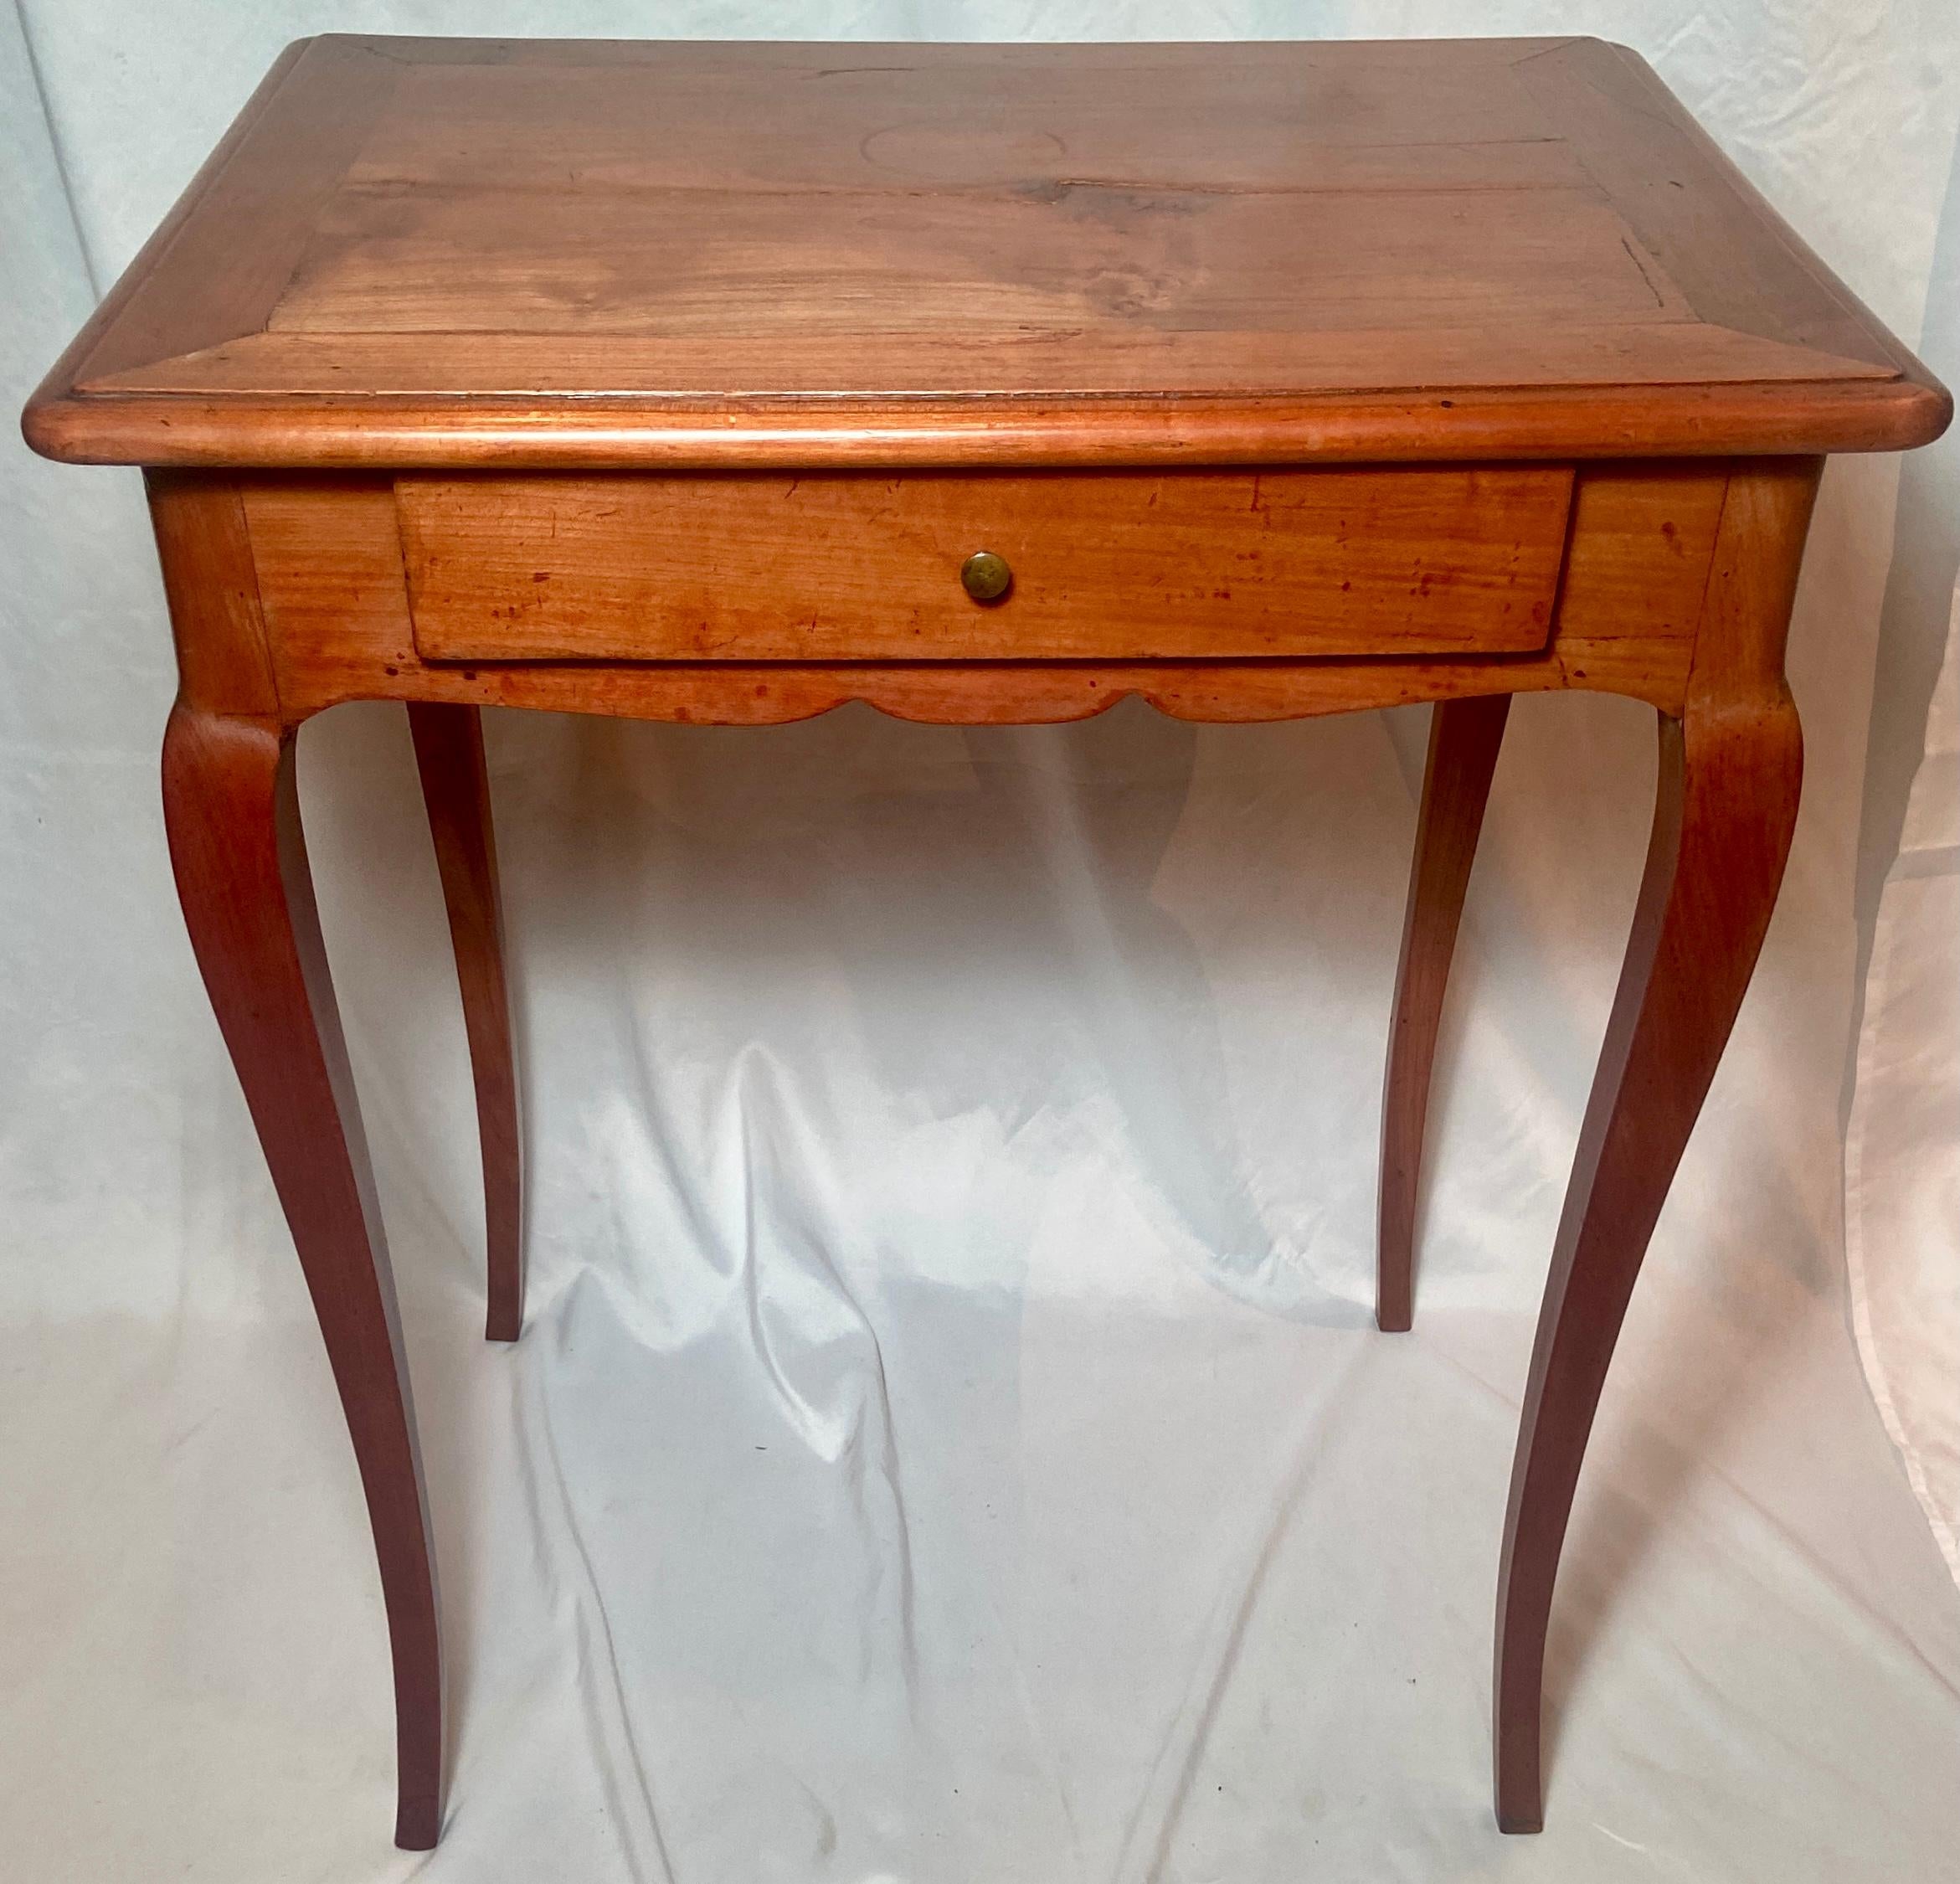 Antique French Provincial fruitwood side table, Circa 1900.